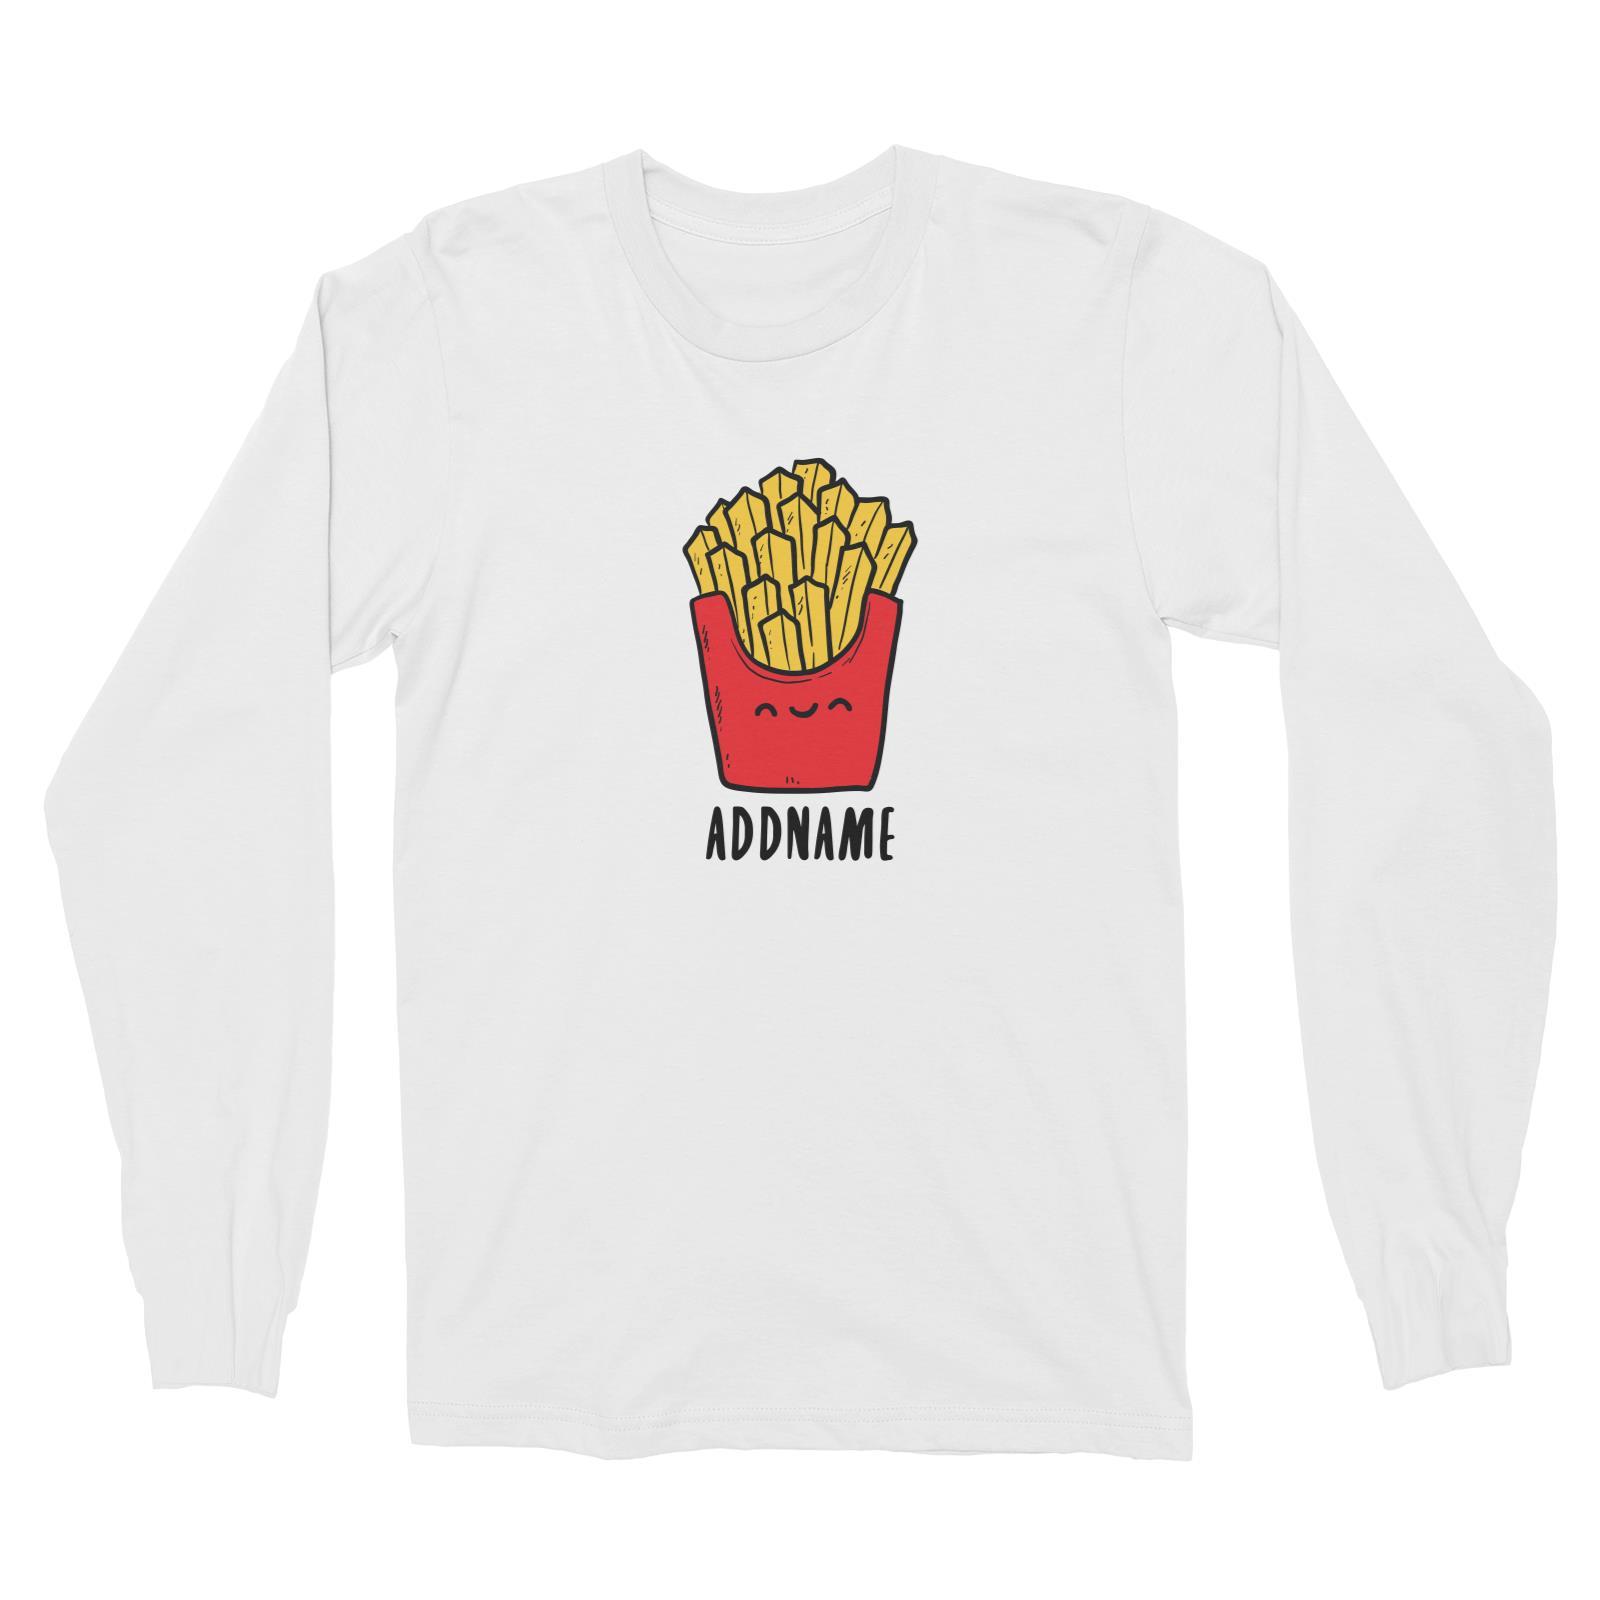 Fast Food Fries Addname Long Sleeve Unisex T-Shirt  Matching Family Comic Cartoon Personalizable Designs